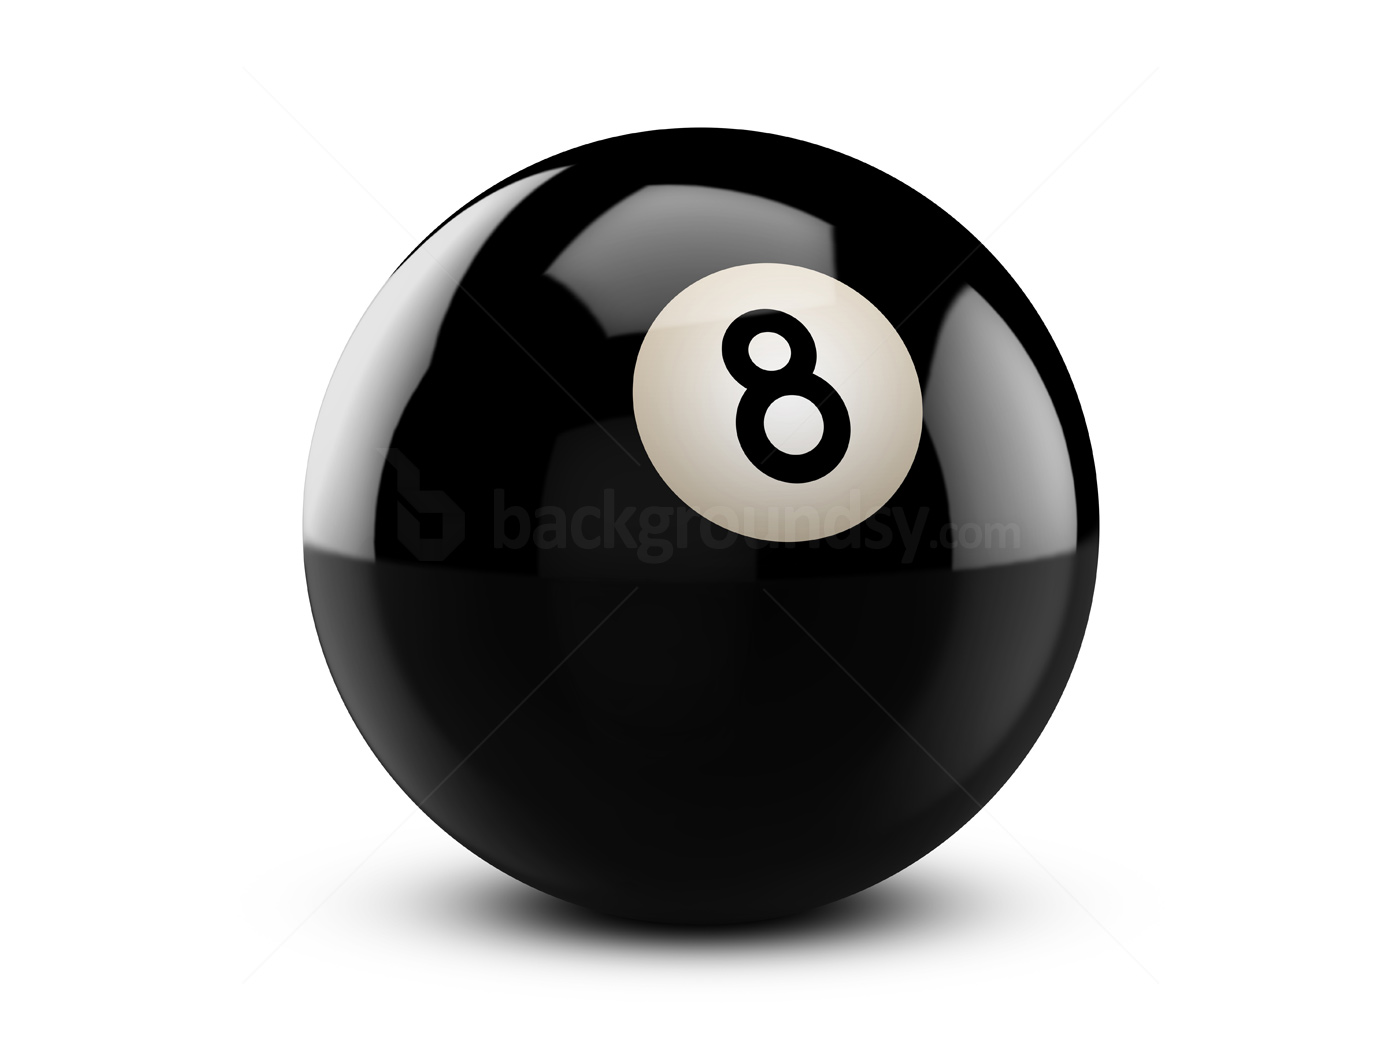 Pool Ball Images - Clipart library